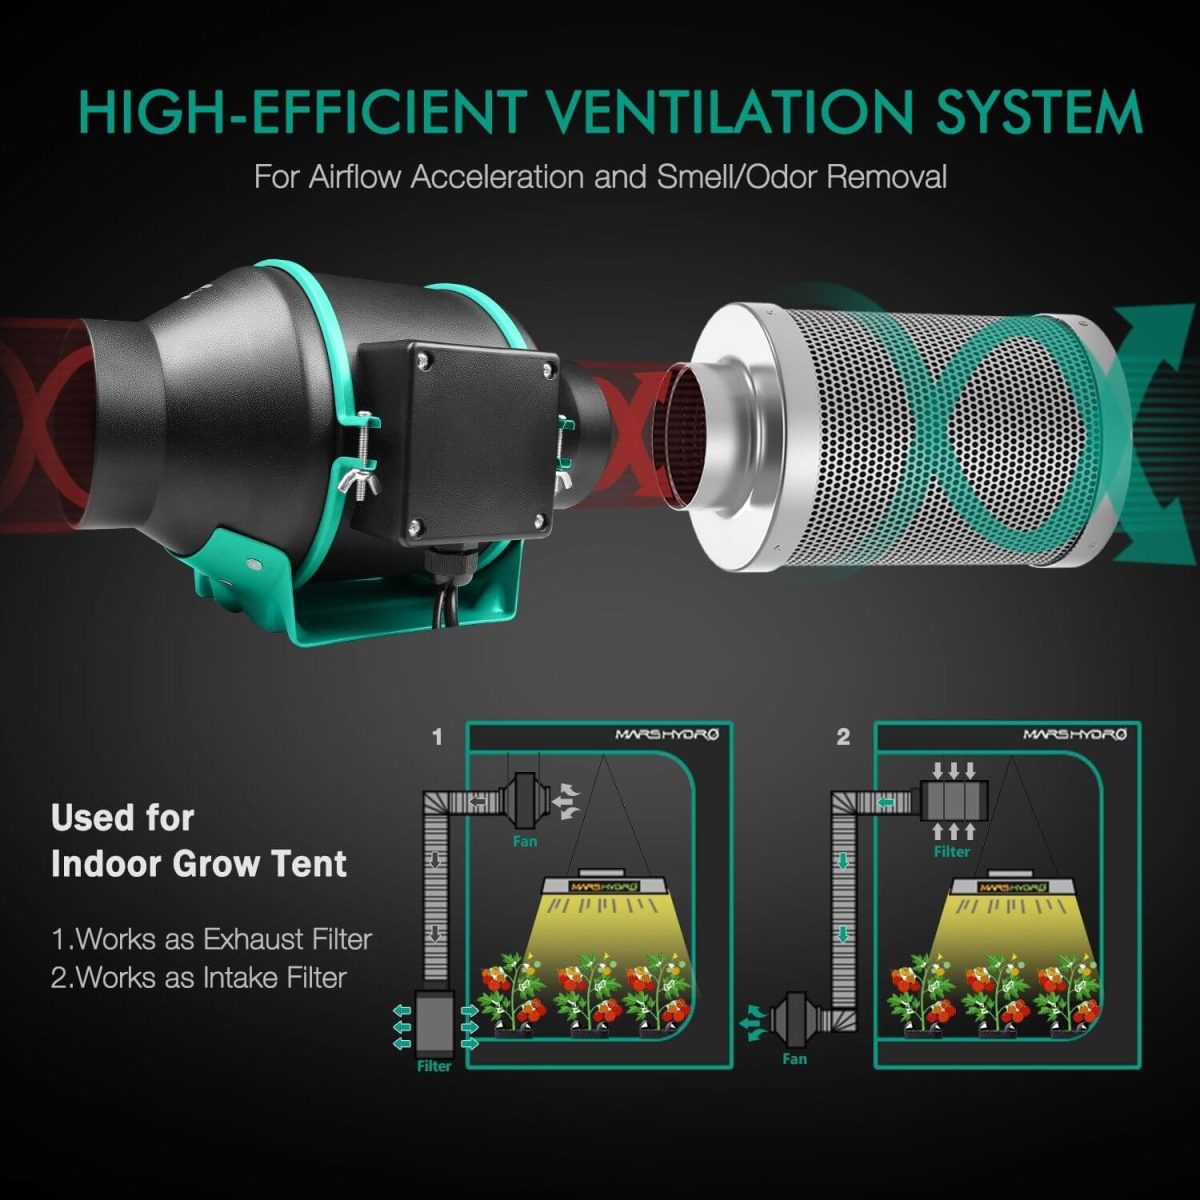 High efficient ventilation system for airflow acceleration and smell/odor removal